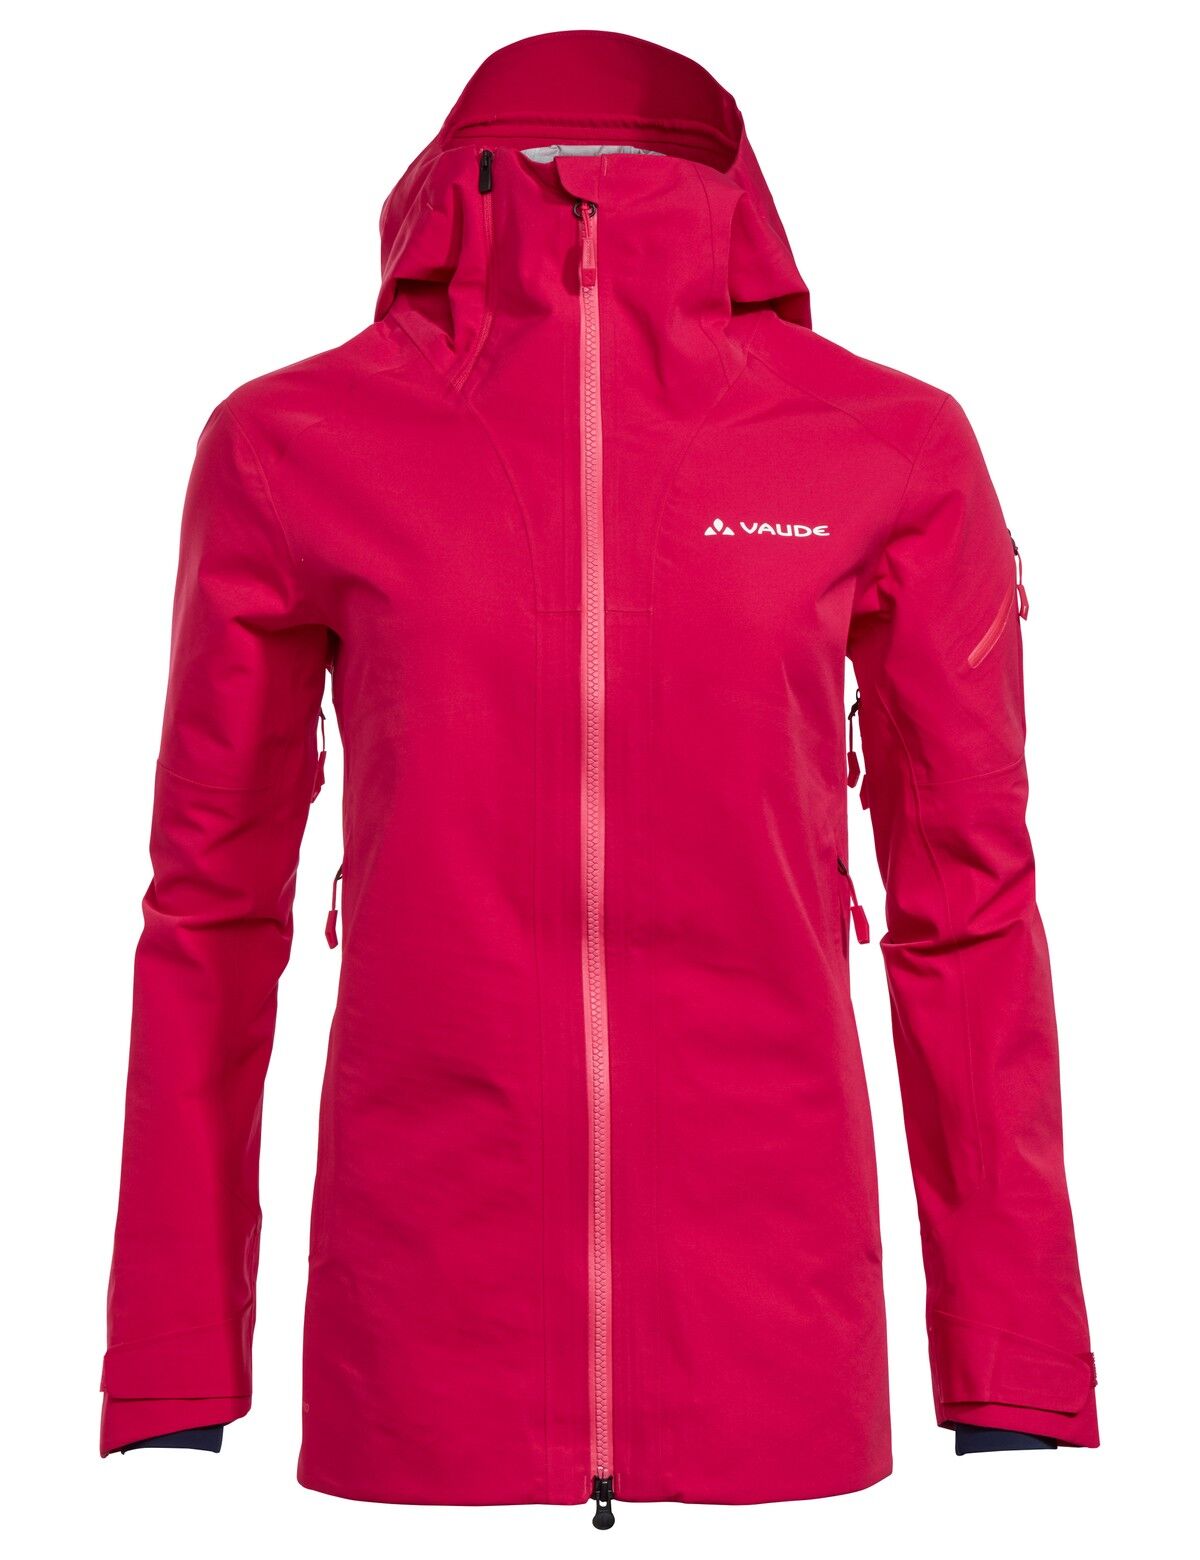 Vaude - Back Bowl 3L Jacket II - Chaqueta impermeable - Mujer